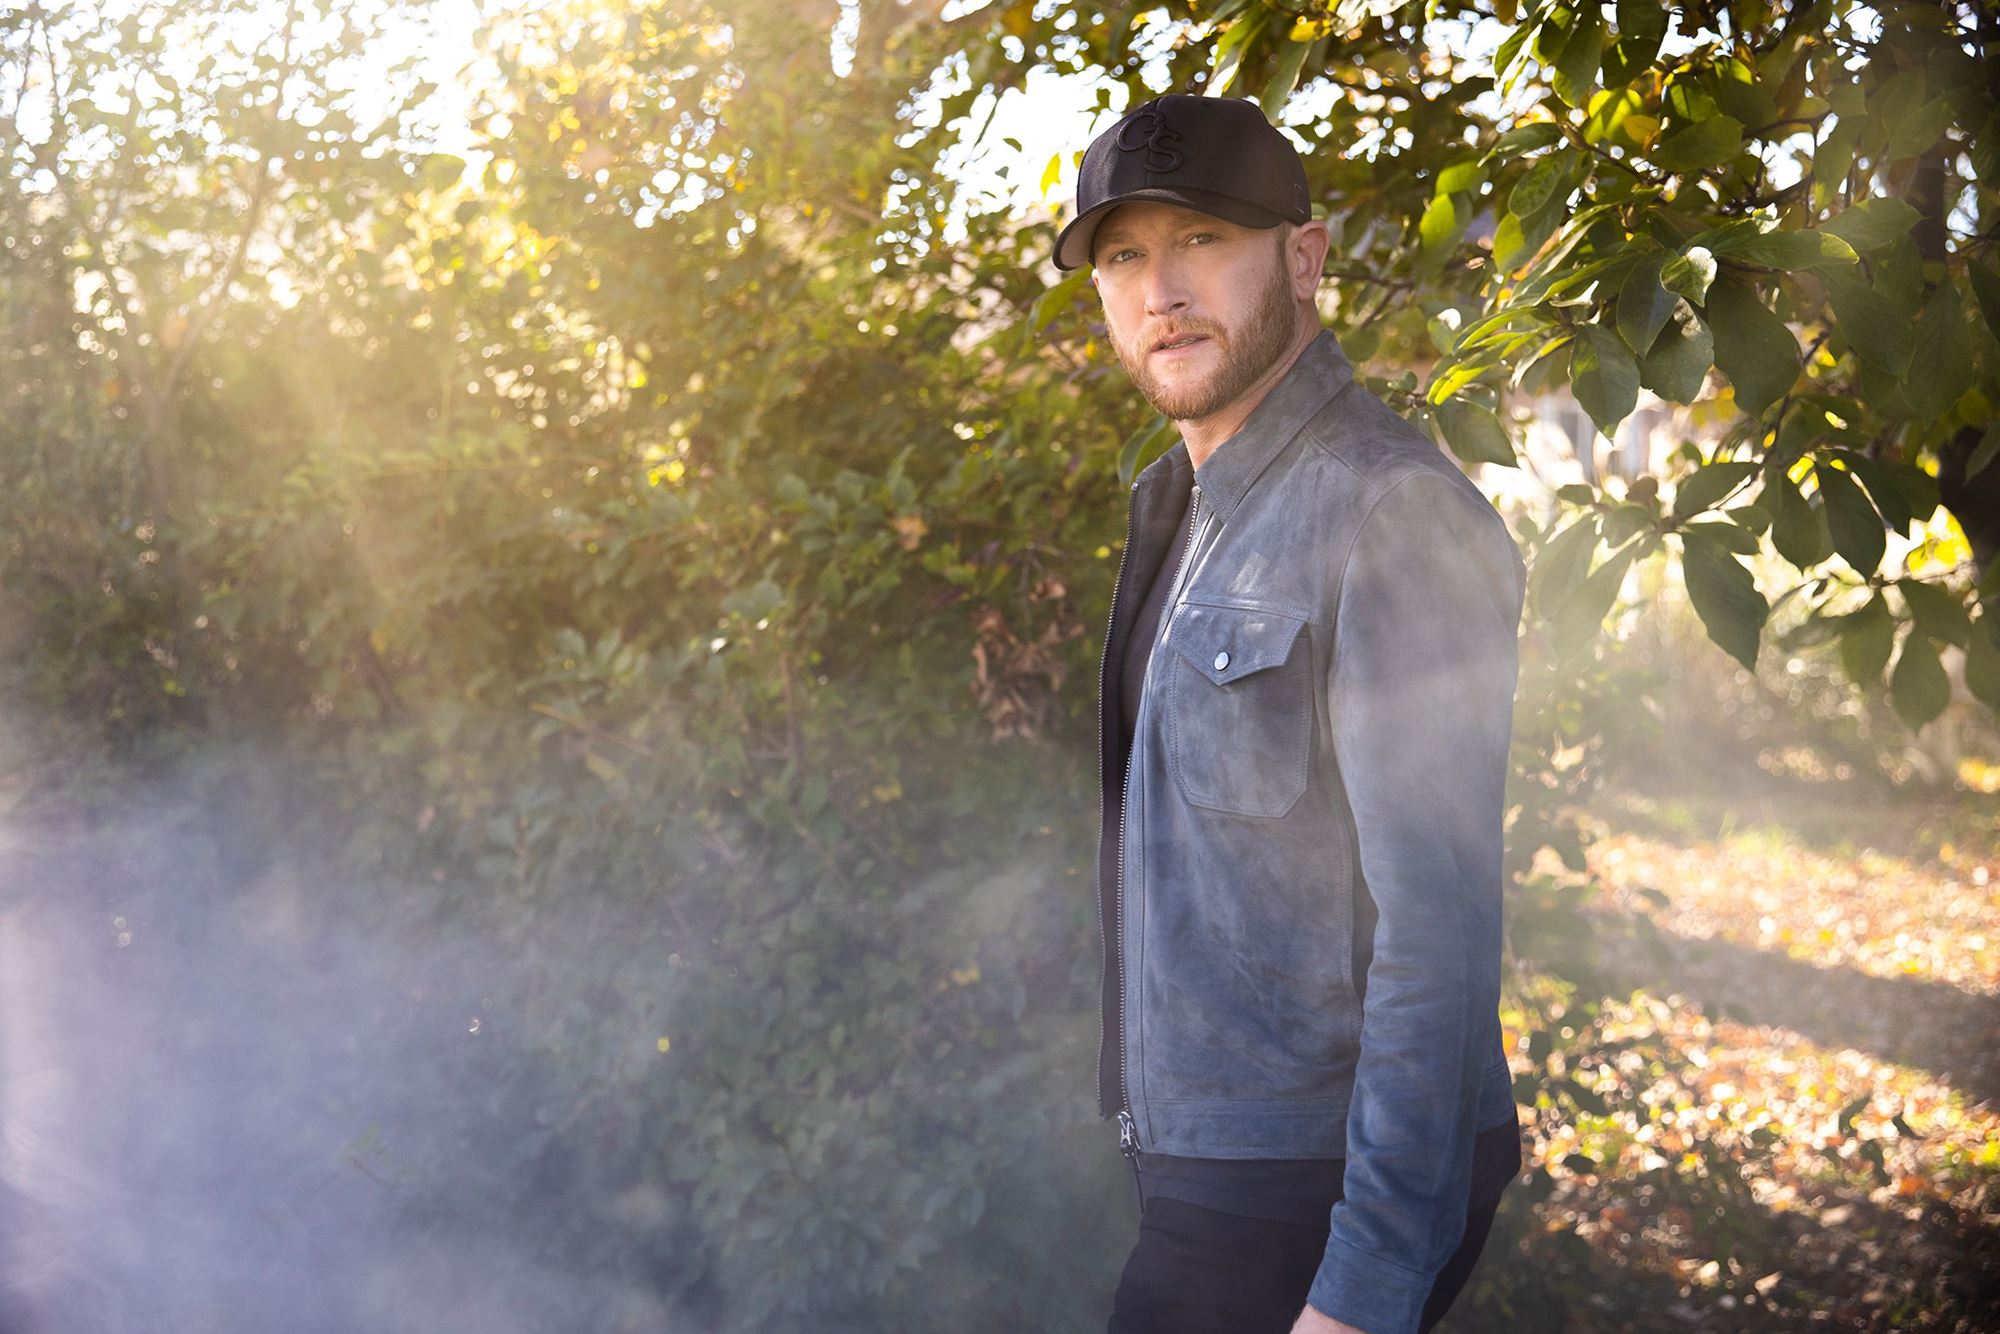 PRCA Rodeo w/ Cole Swindell <br> Tuesday, Feb. 21 at 7 PM